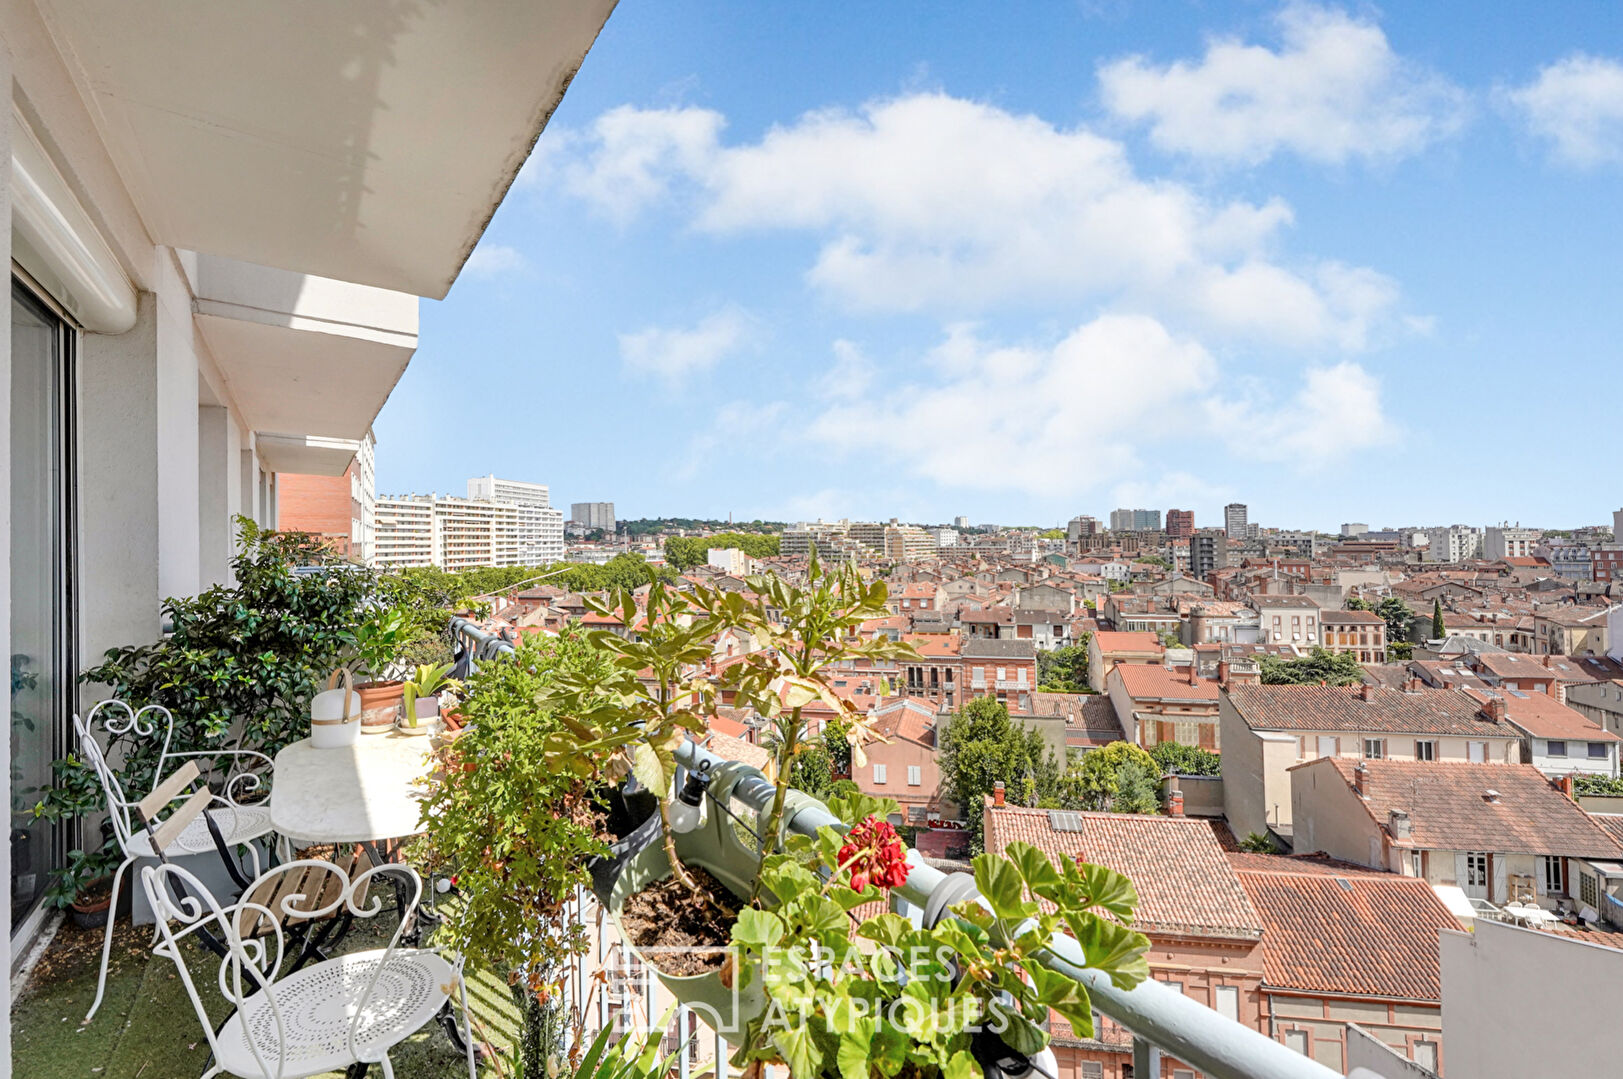 Apartment with breathtaking views of Toulouse